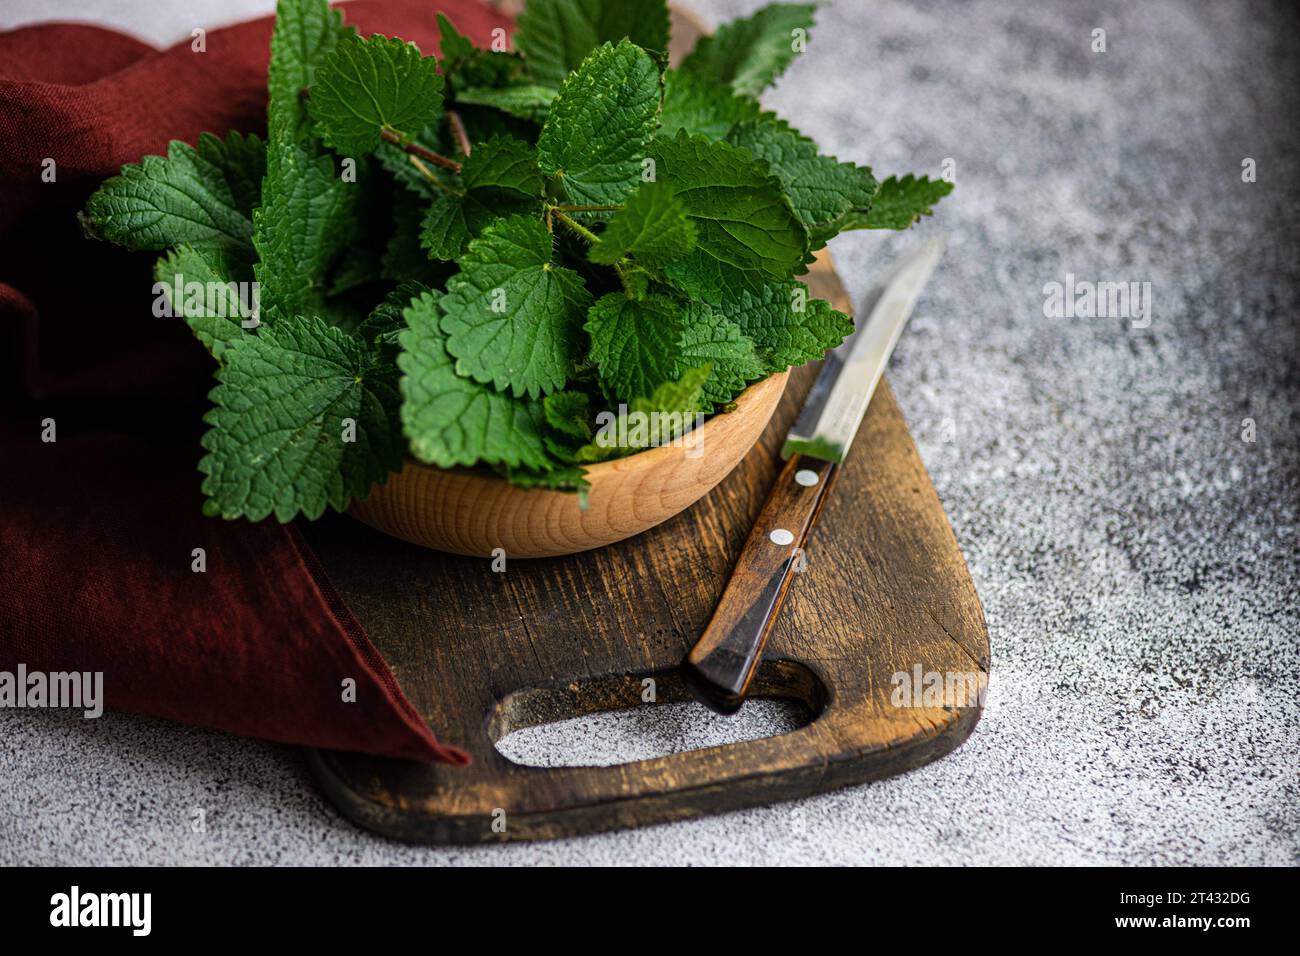 Close-up of a bowl of fresh nettle leaves on a chopping board Stock Photo